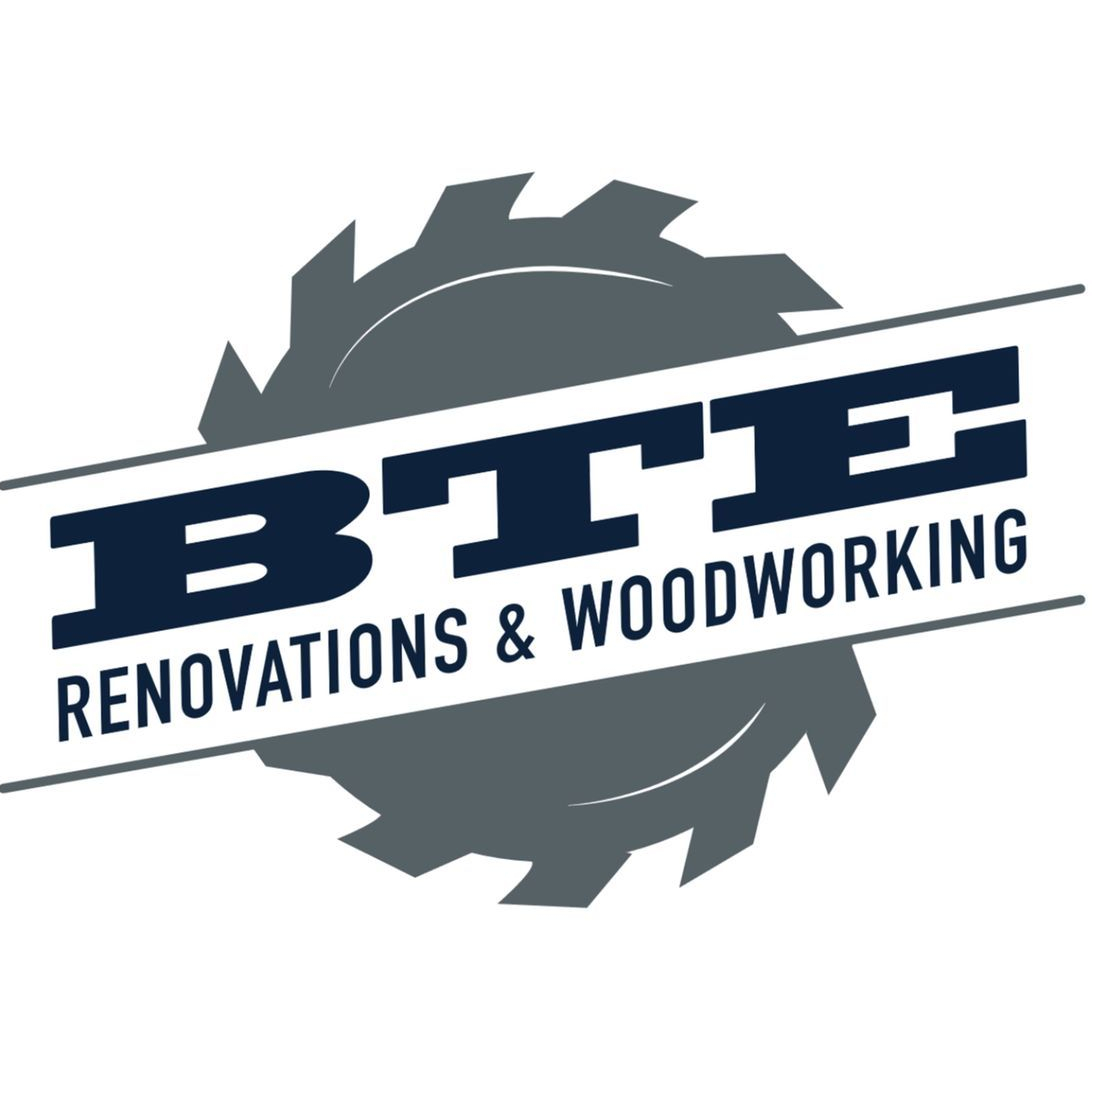 BTE renovations and woodworking logo